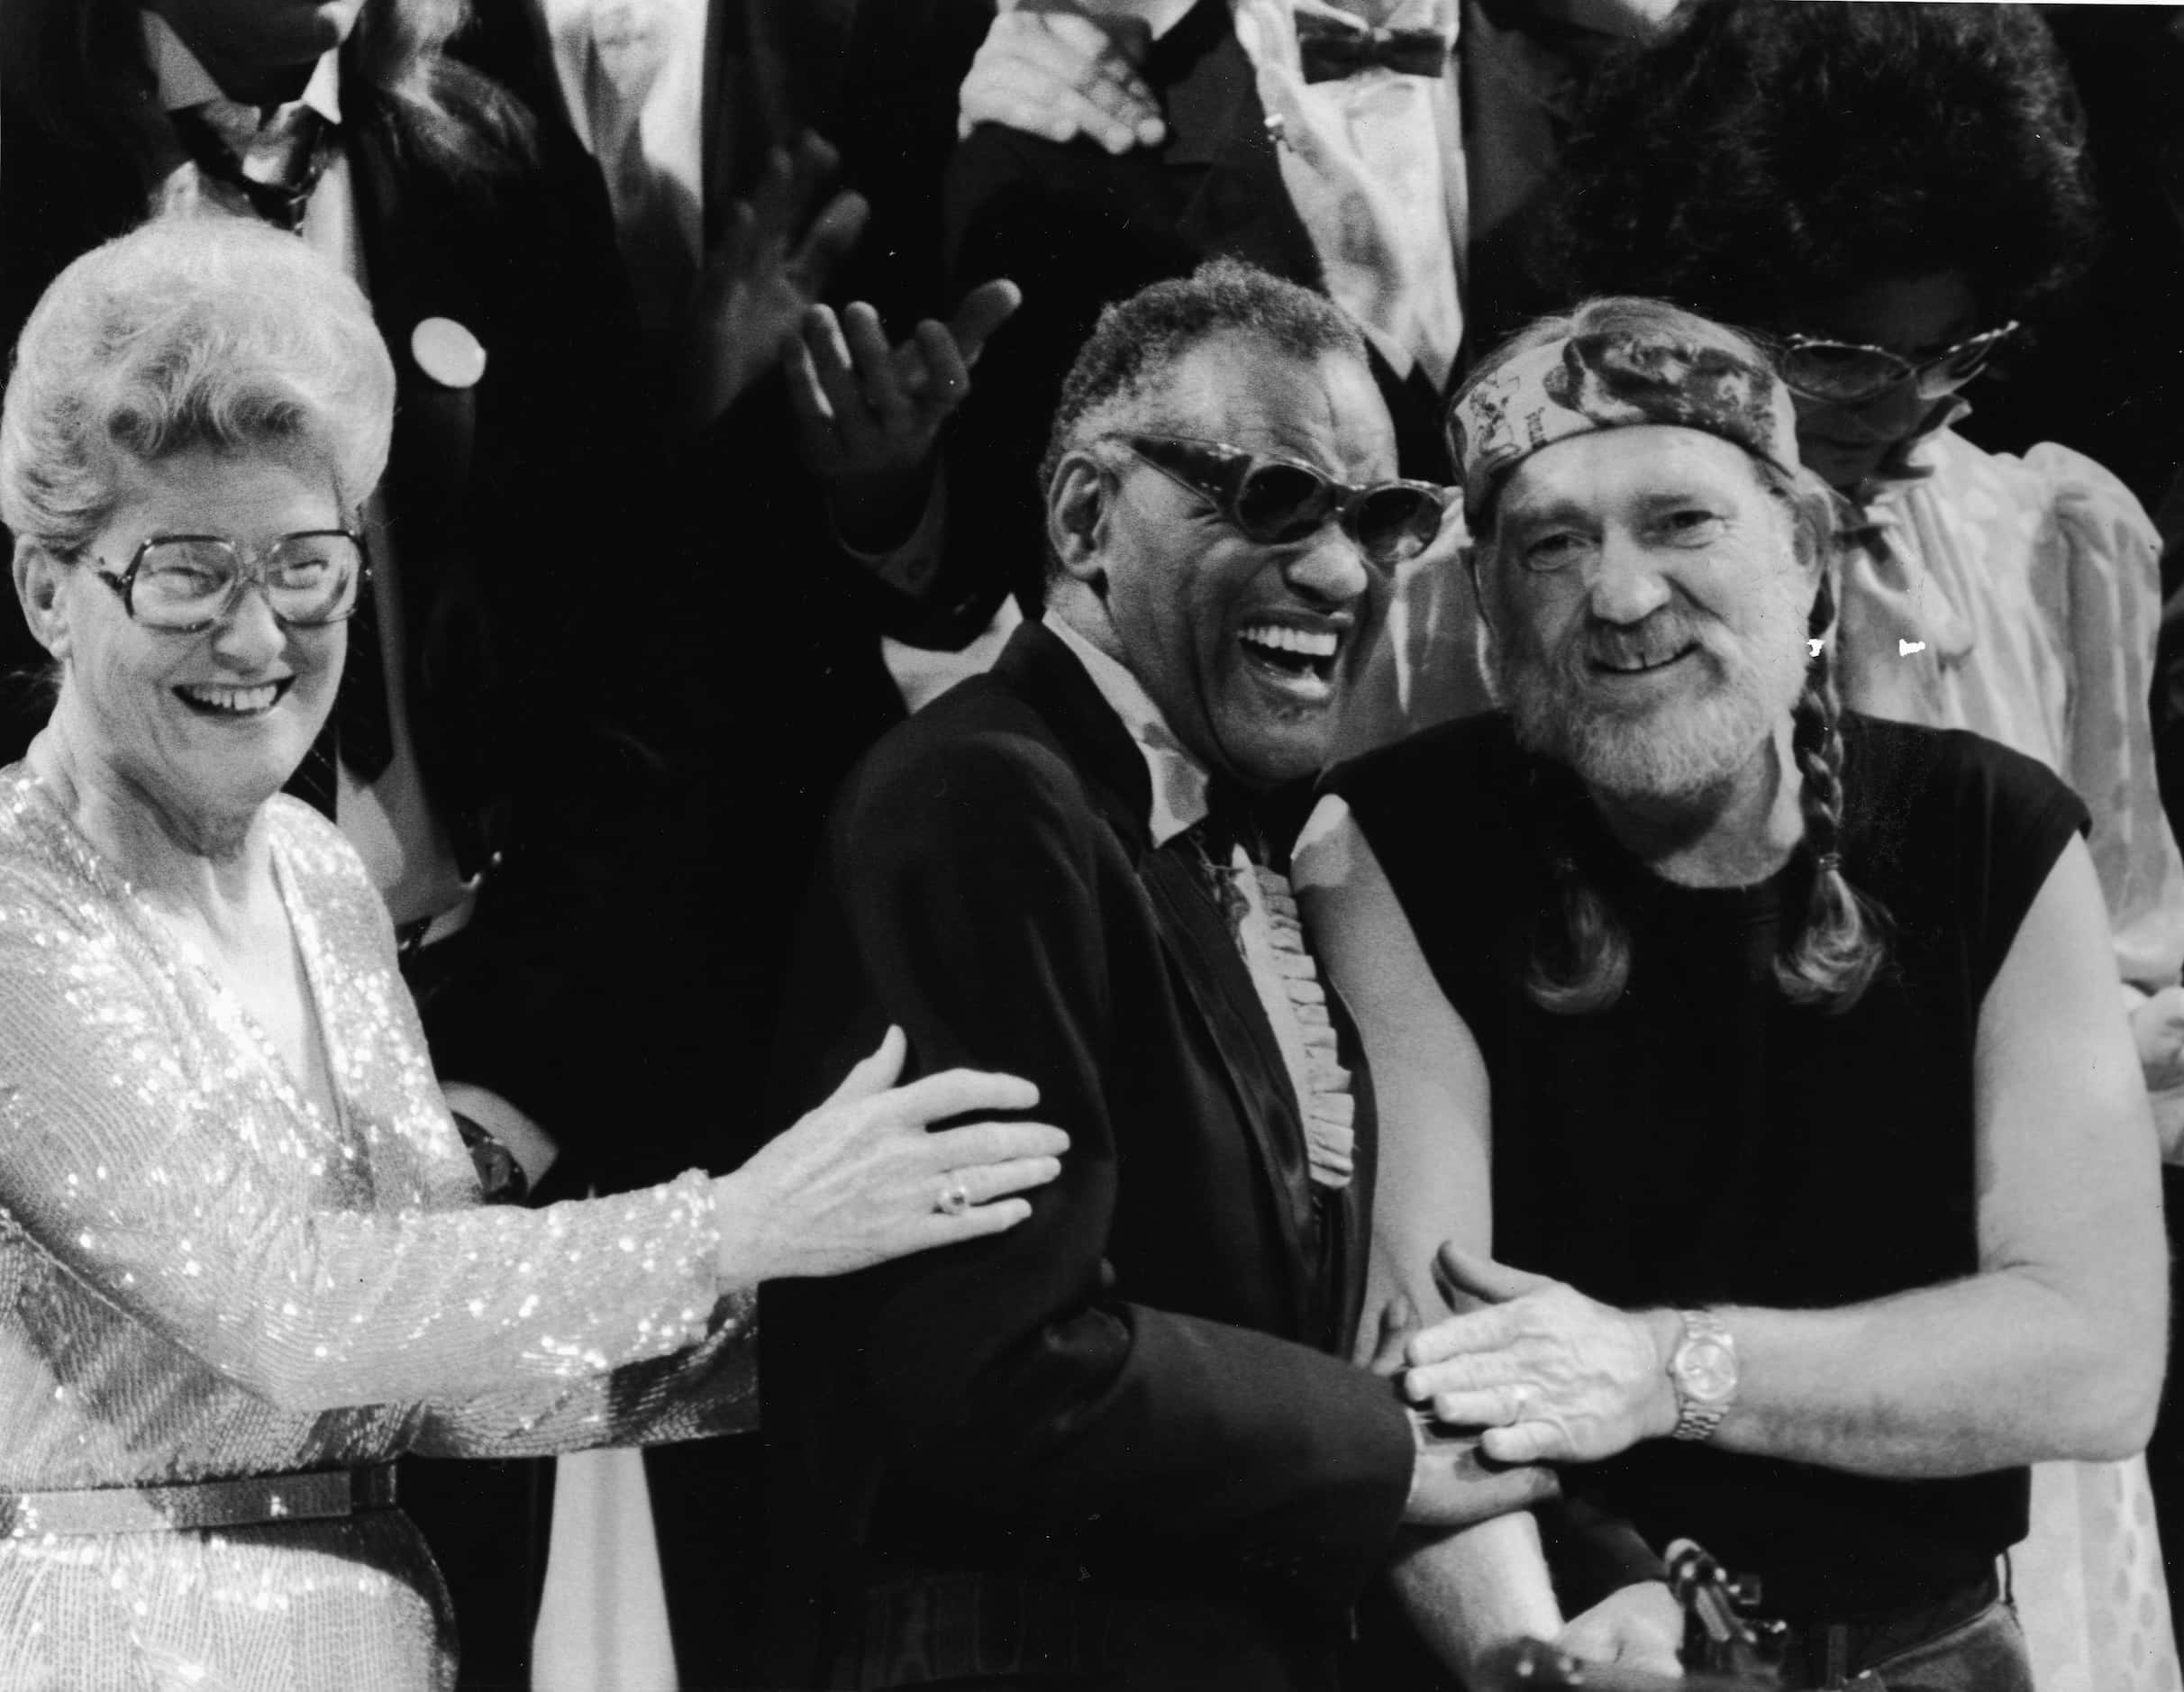 1980 - American musicians Minnie Pearl, Ray Charles and Willie Nelson laugh together.